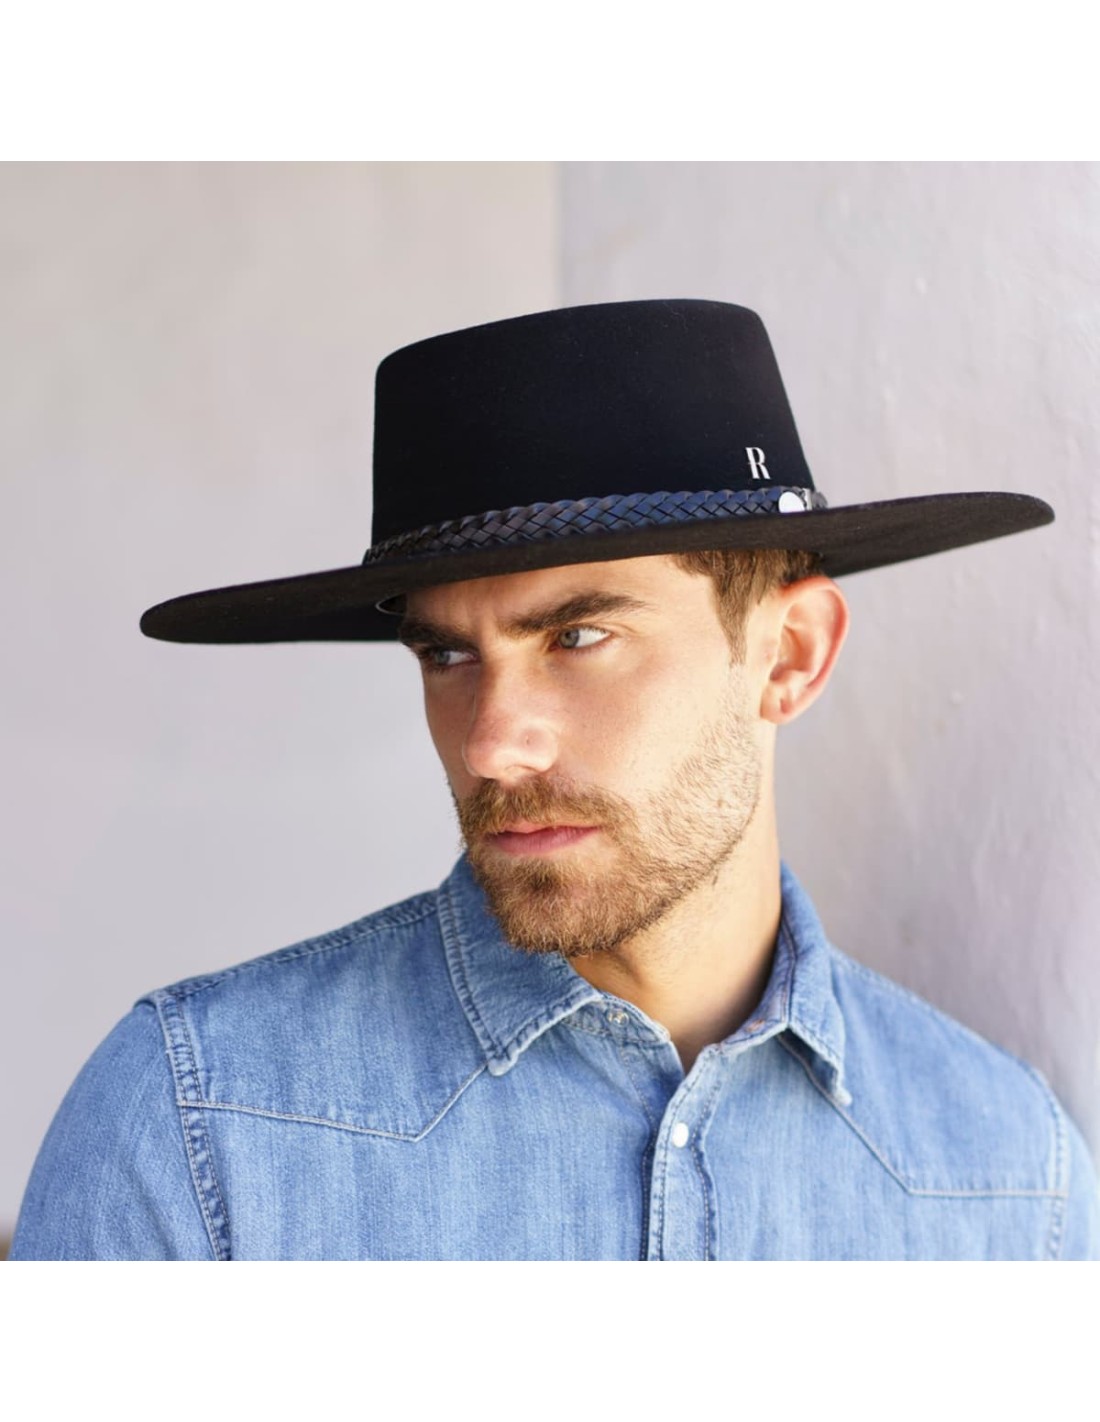 Your Men's Canotier Style Hat: 100% Elegance and Quality in Stiff Wool,  Made in Spain